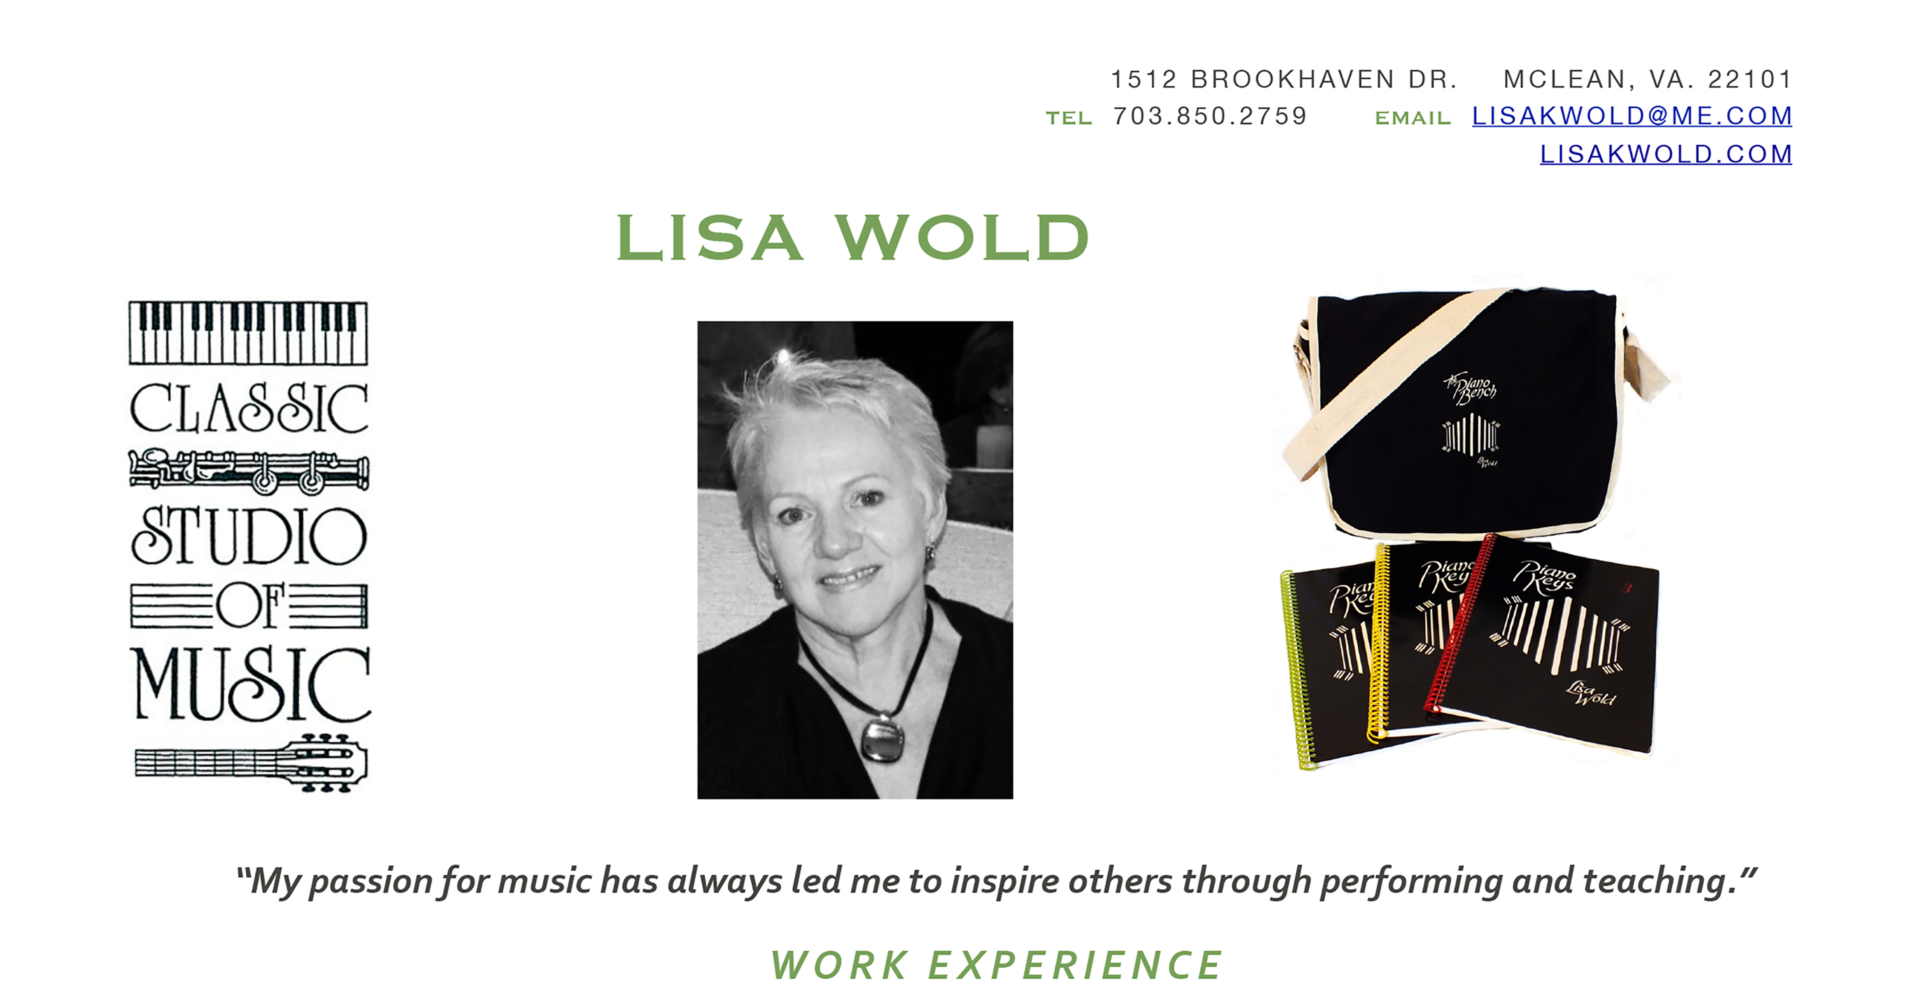 Resume of Lisa Wold copy